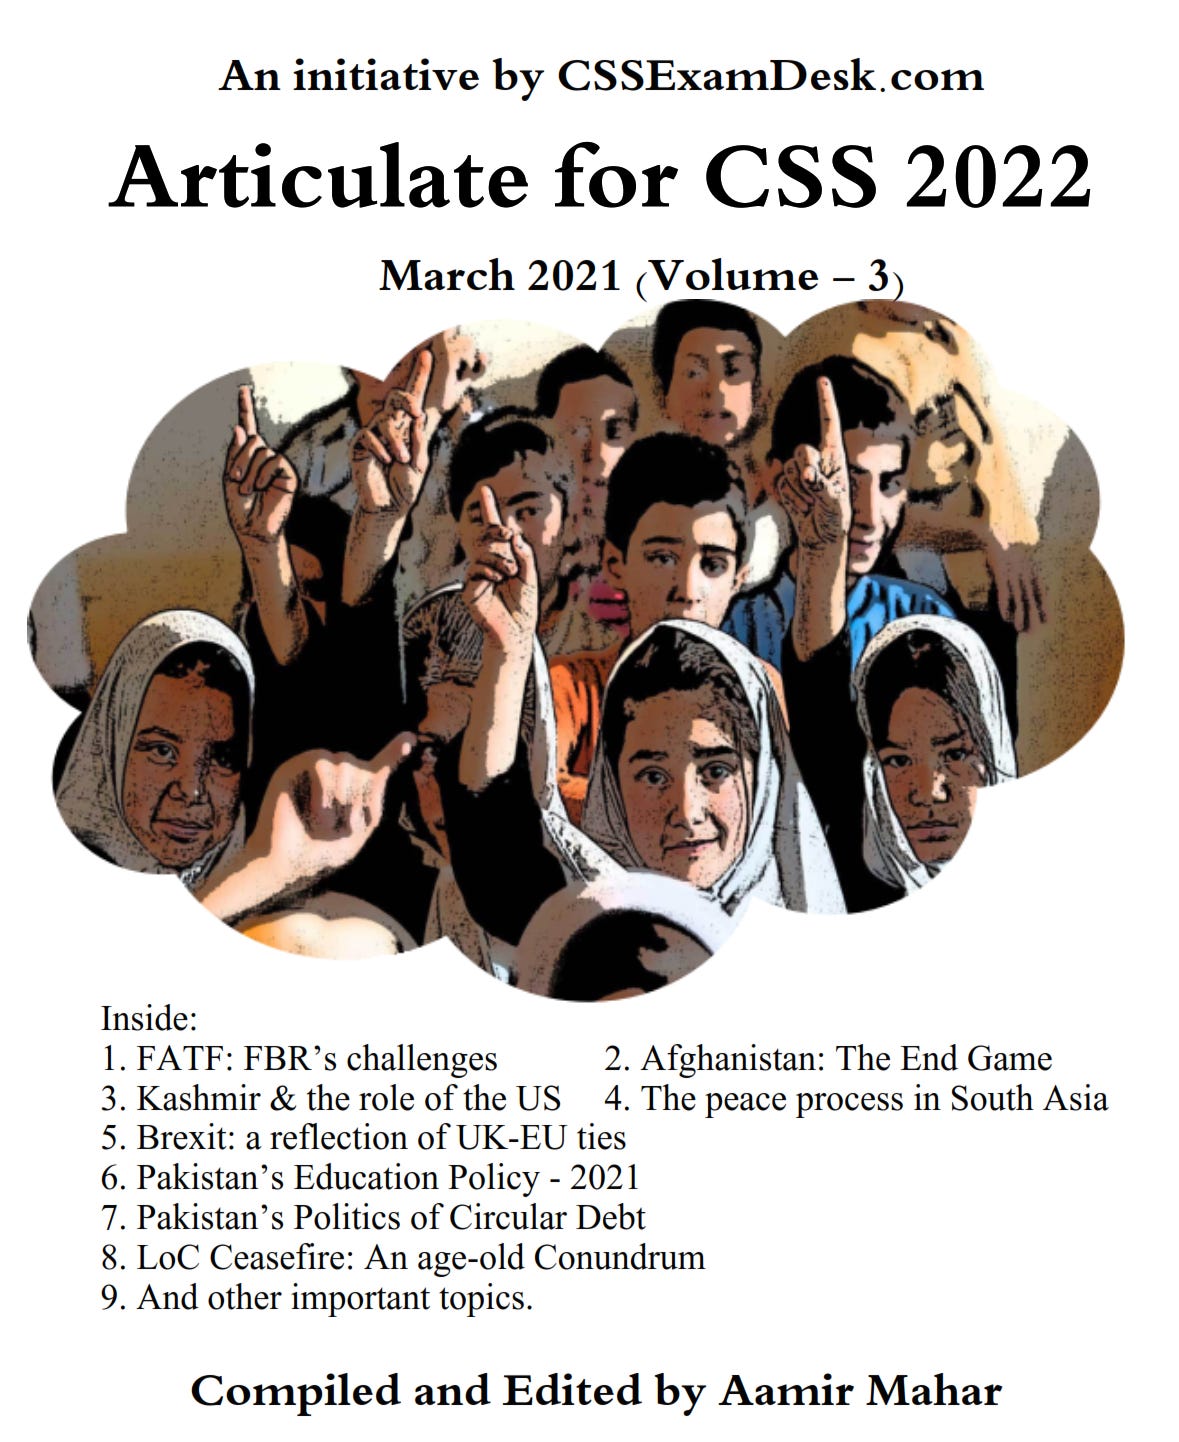 Rapid CSS 2022 17.7.0.248 download the new for android